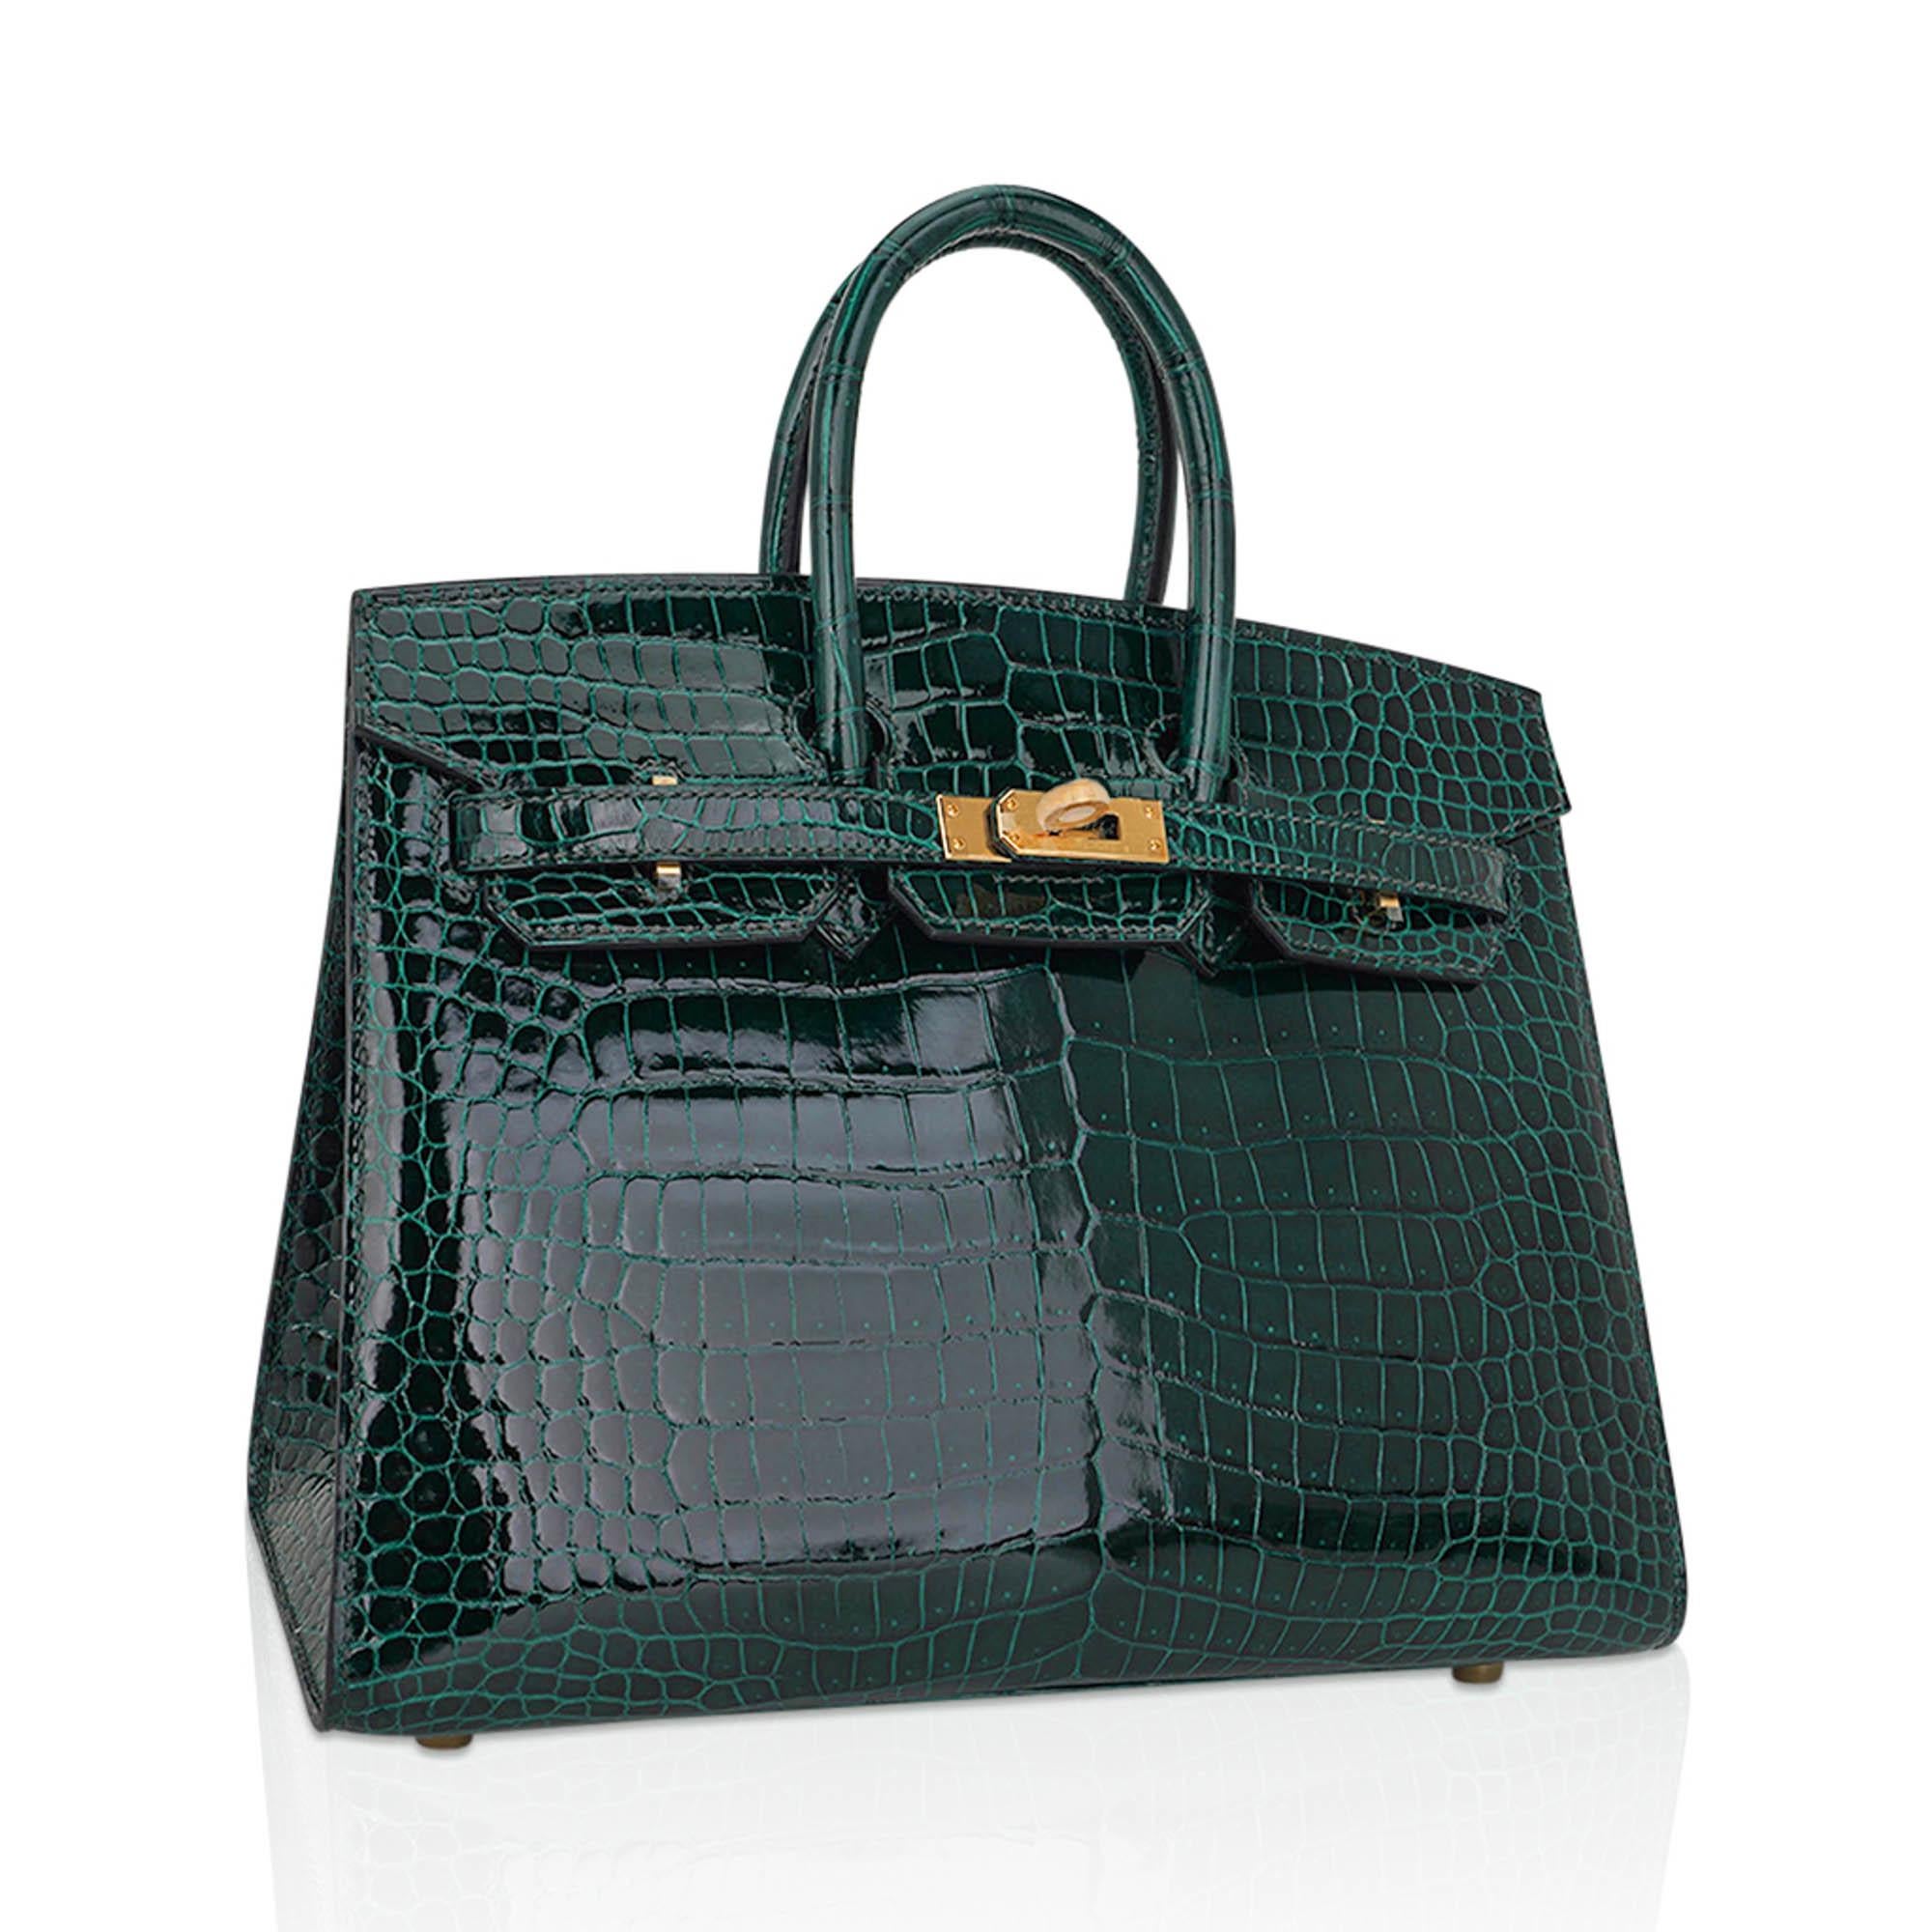 Mightychic offers an Hermes Birkin Sellier 25 bag featured in Vert Fonce Porosus Crocodile. 
Stunning with a jewel toned Emerald green.
This rich dark green is highlighted with the lighter hue between the scales with stunning effect.
Neutral and